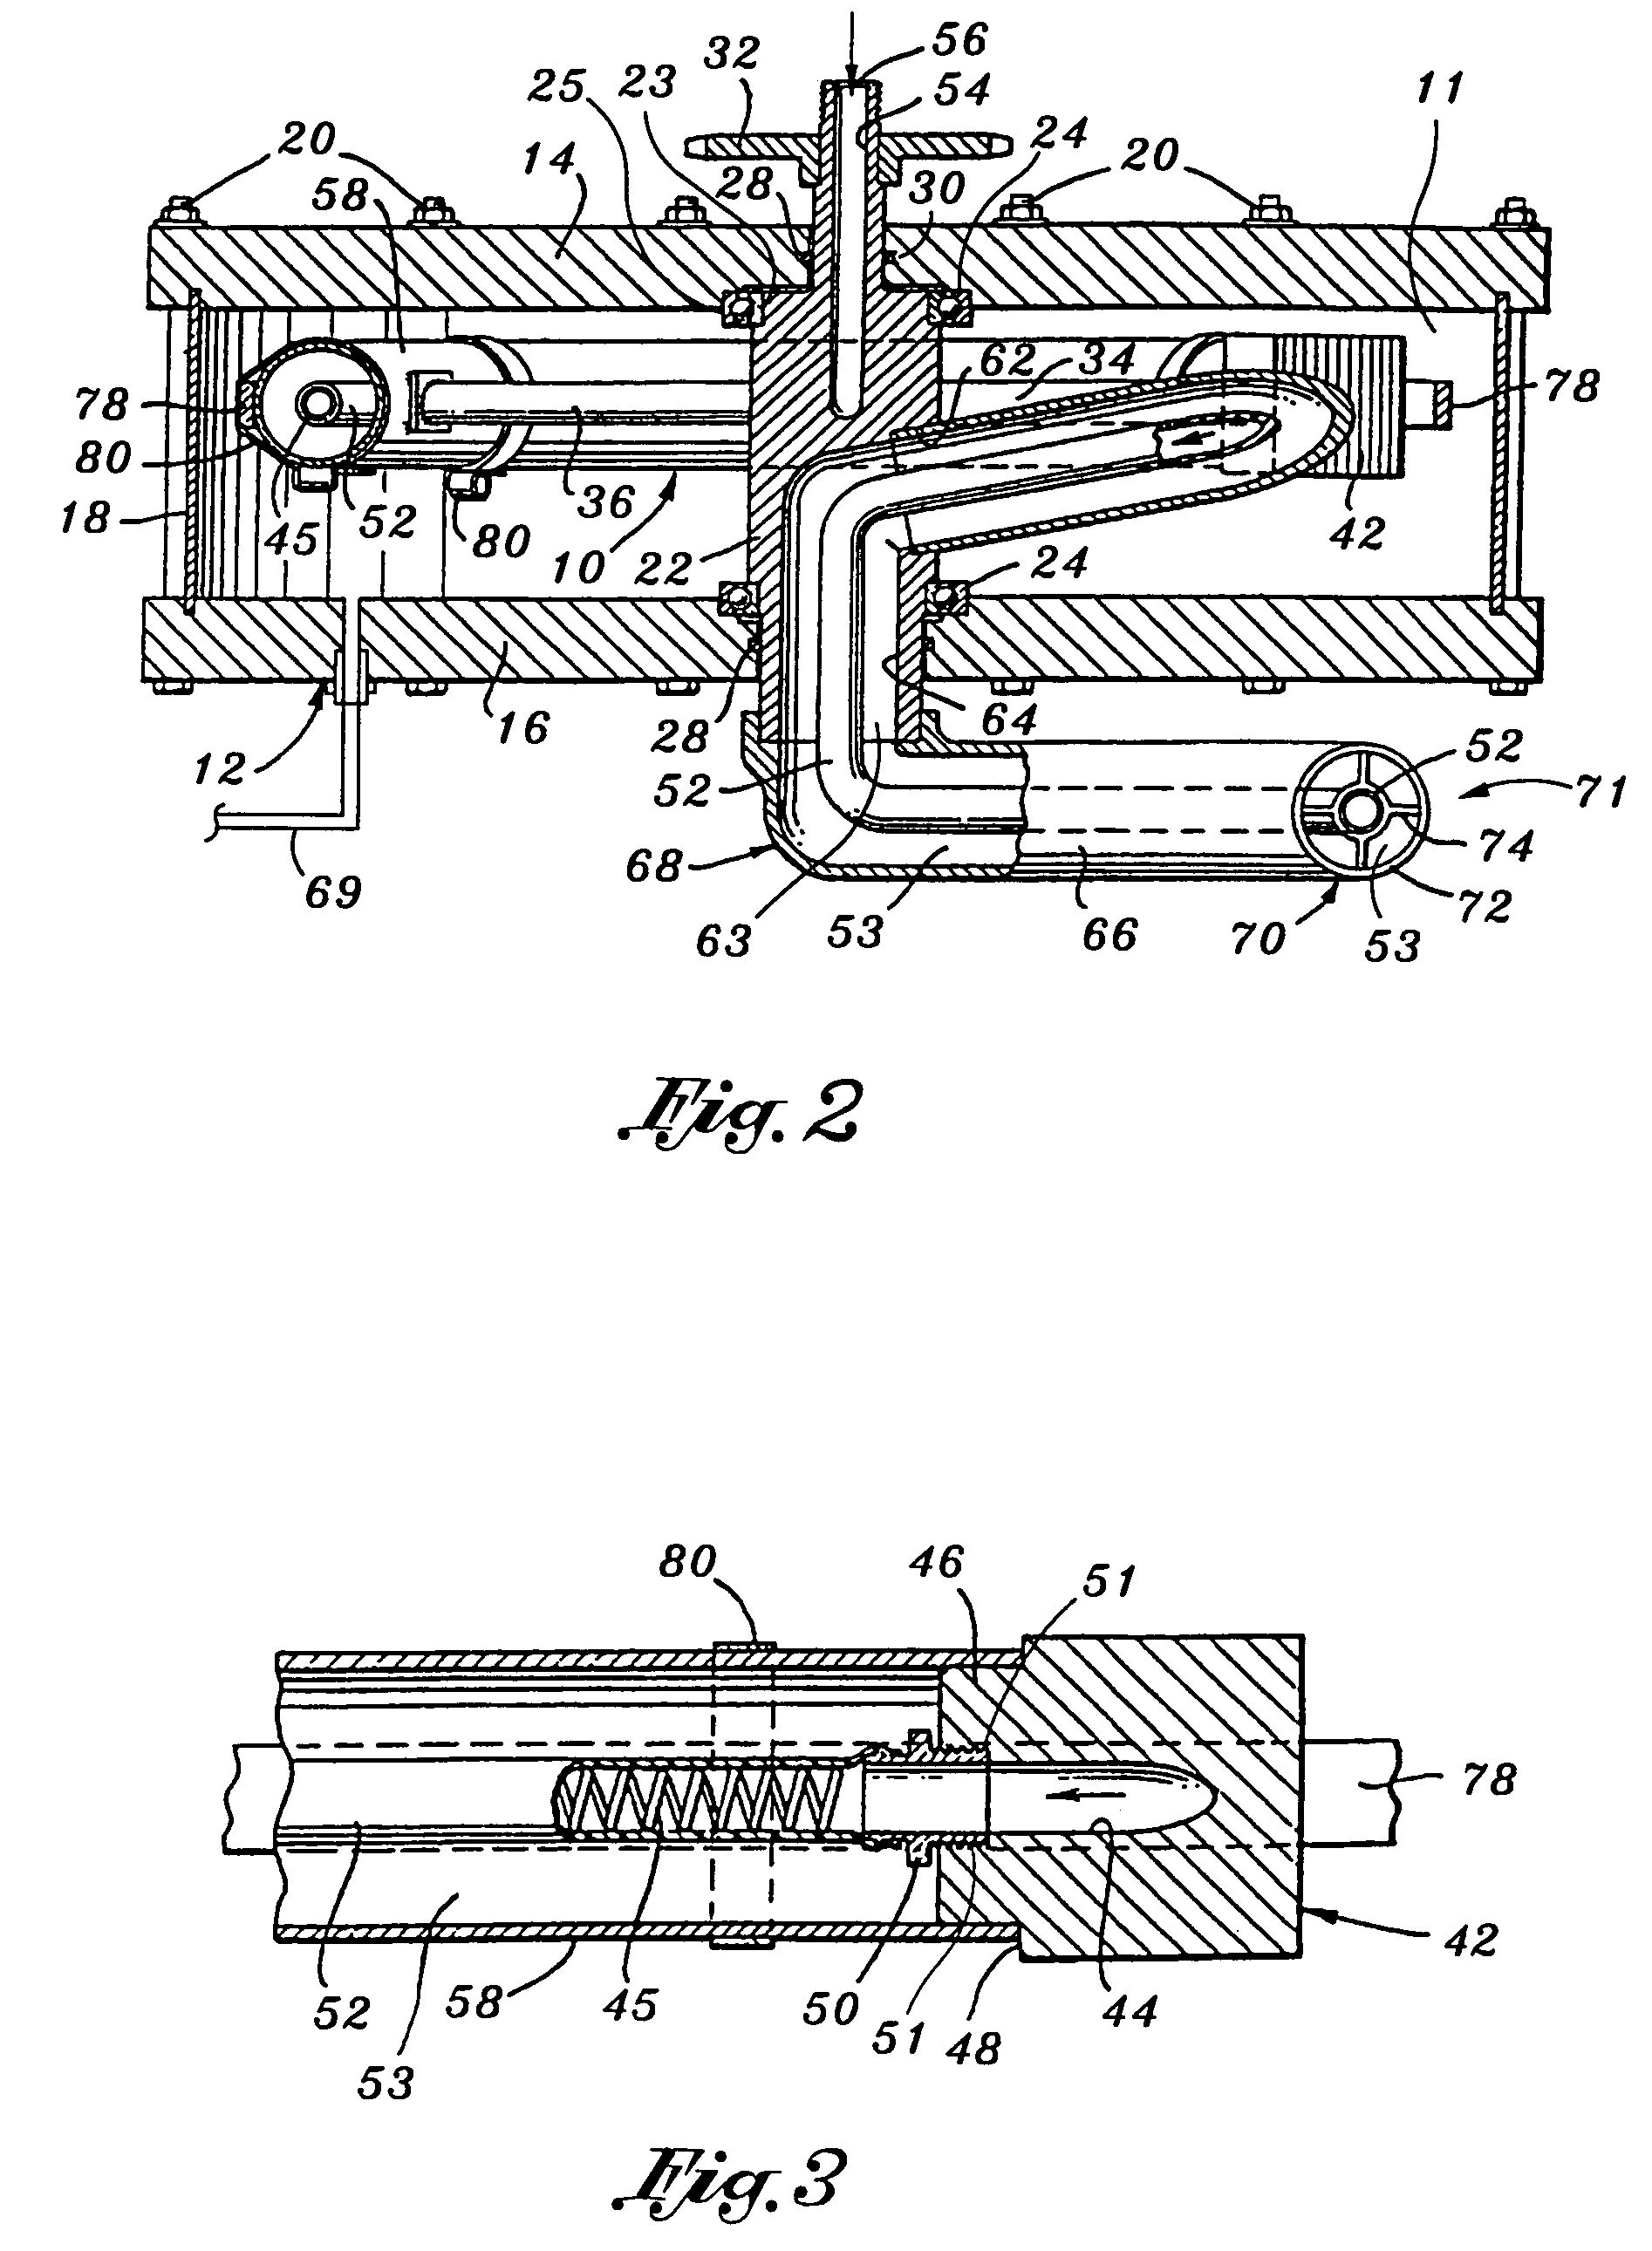 Gas-jet driven rotary device for generating a field and a process for treating items within the field for increased performance